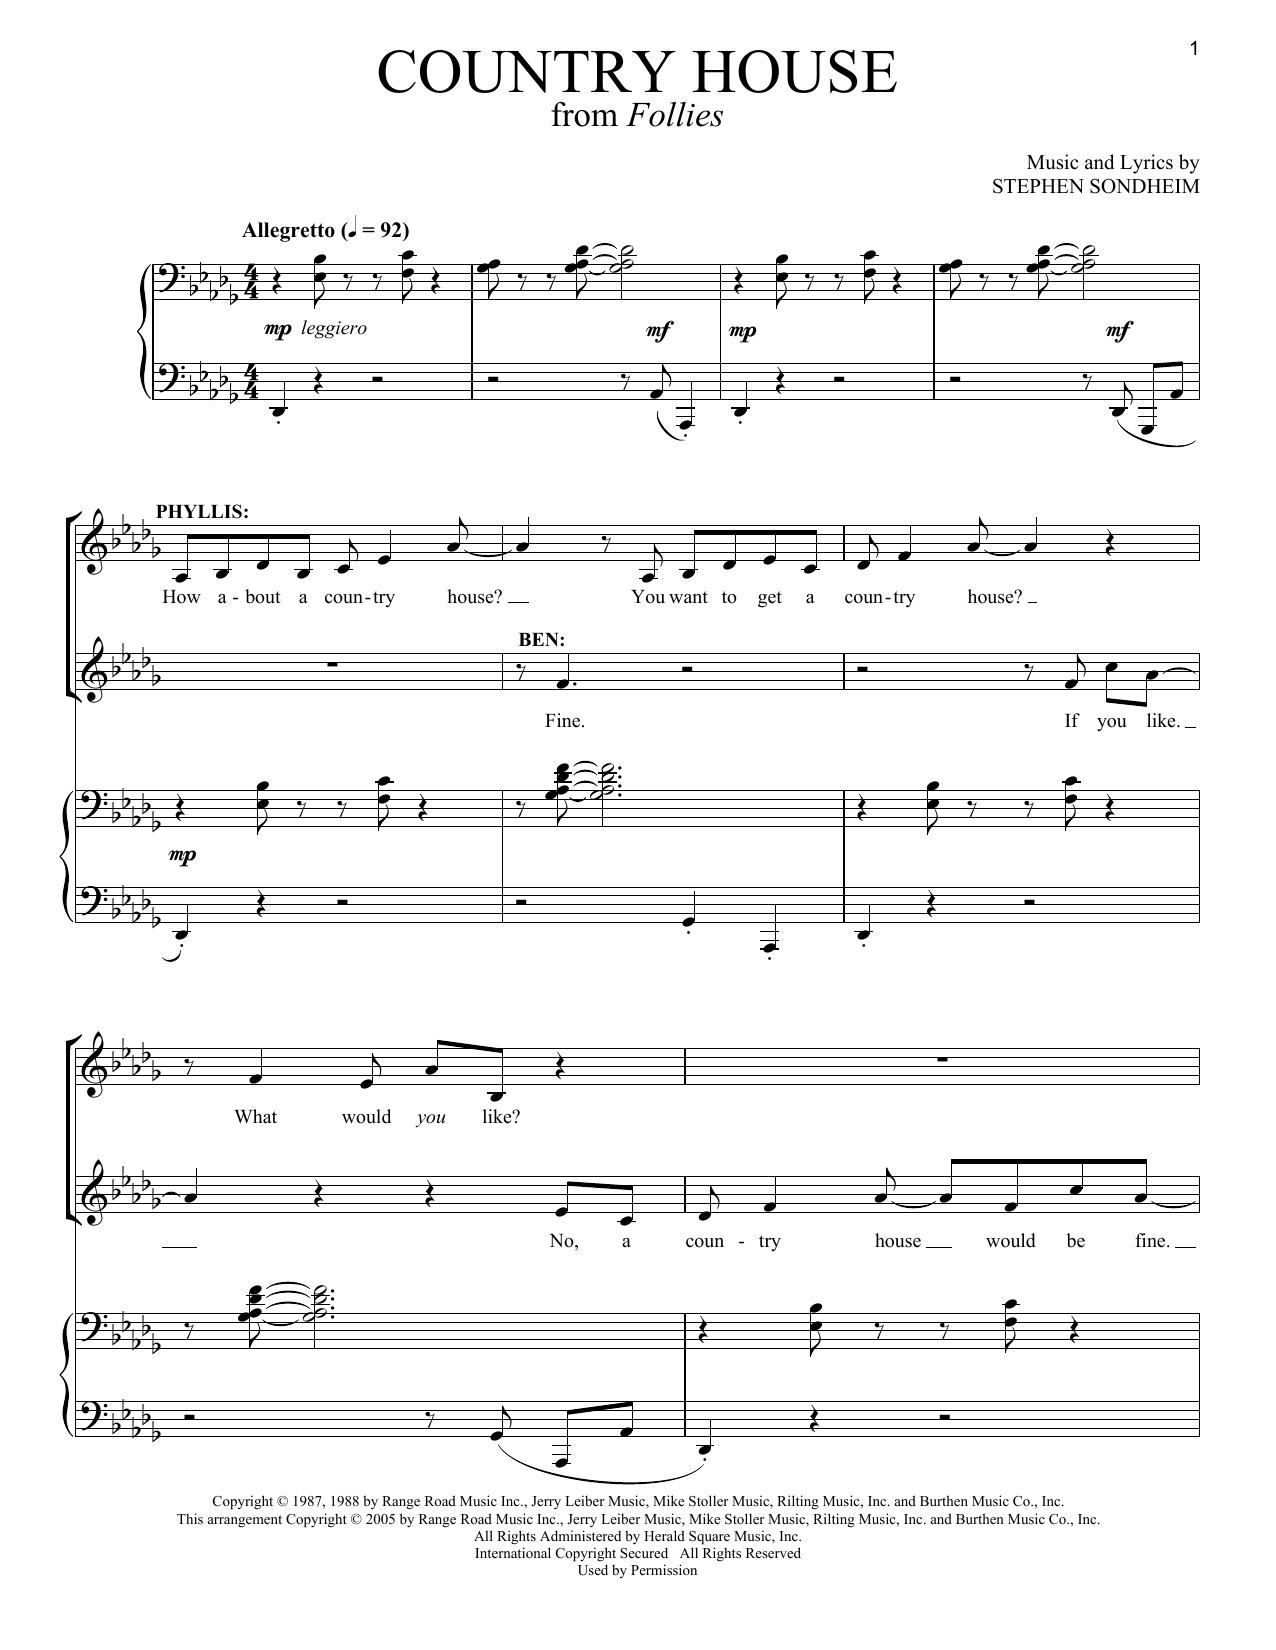 Stephen Sondheim Country House (1987) sheet music notes and chords. Download Printable PDF.